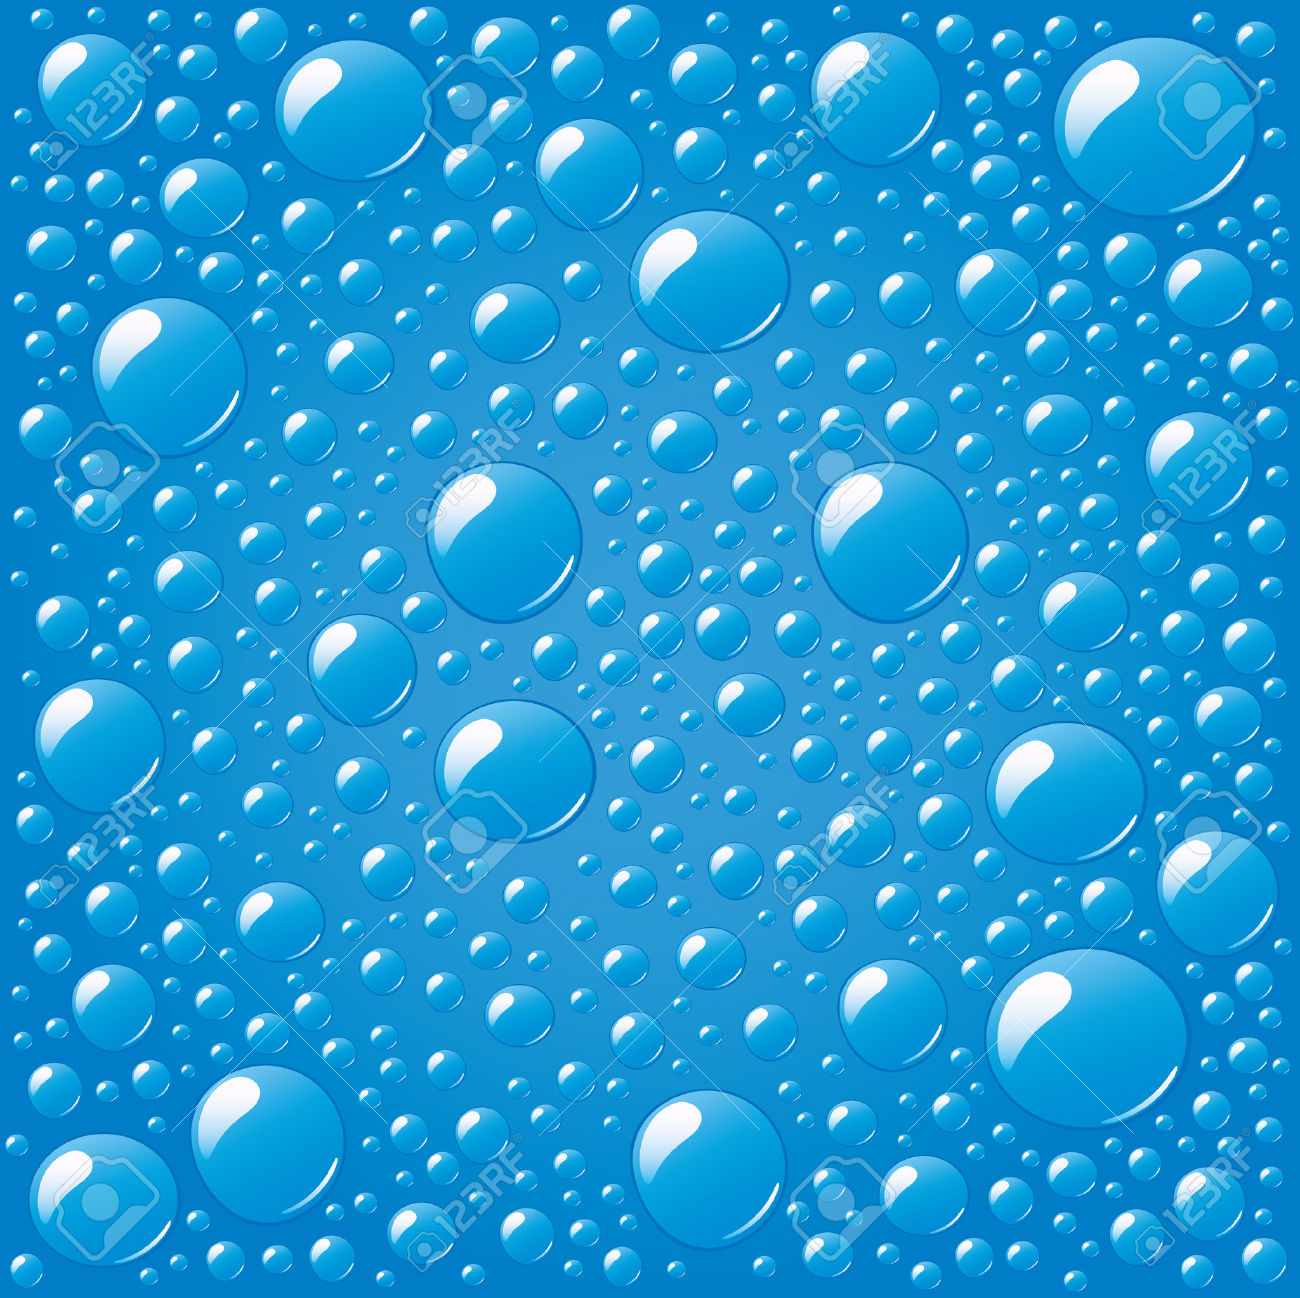 water clipart blue